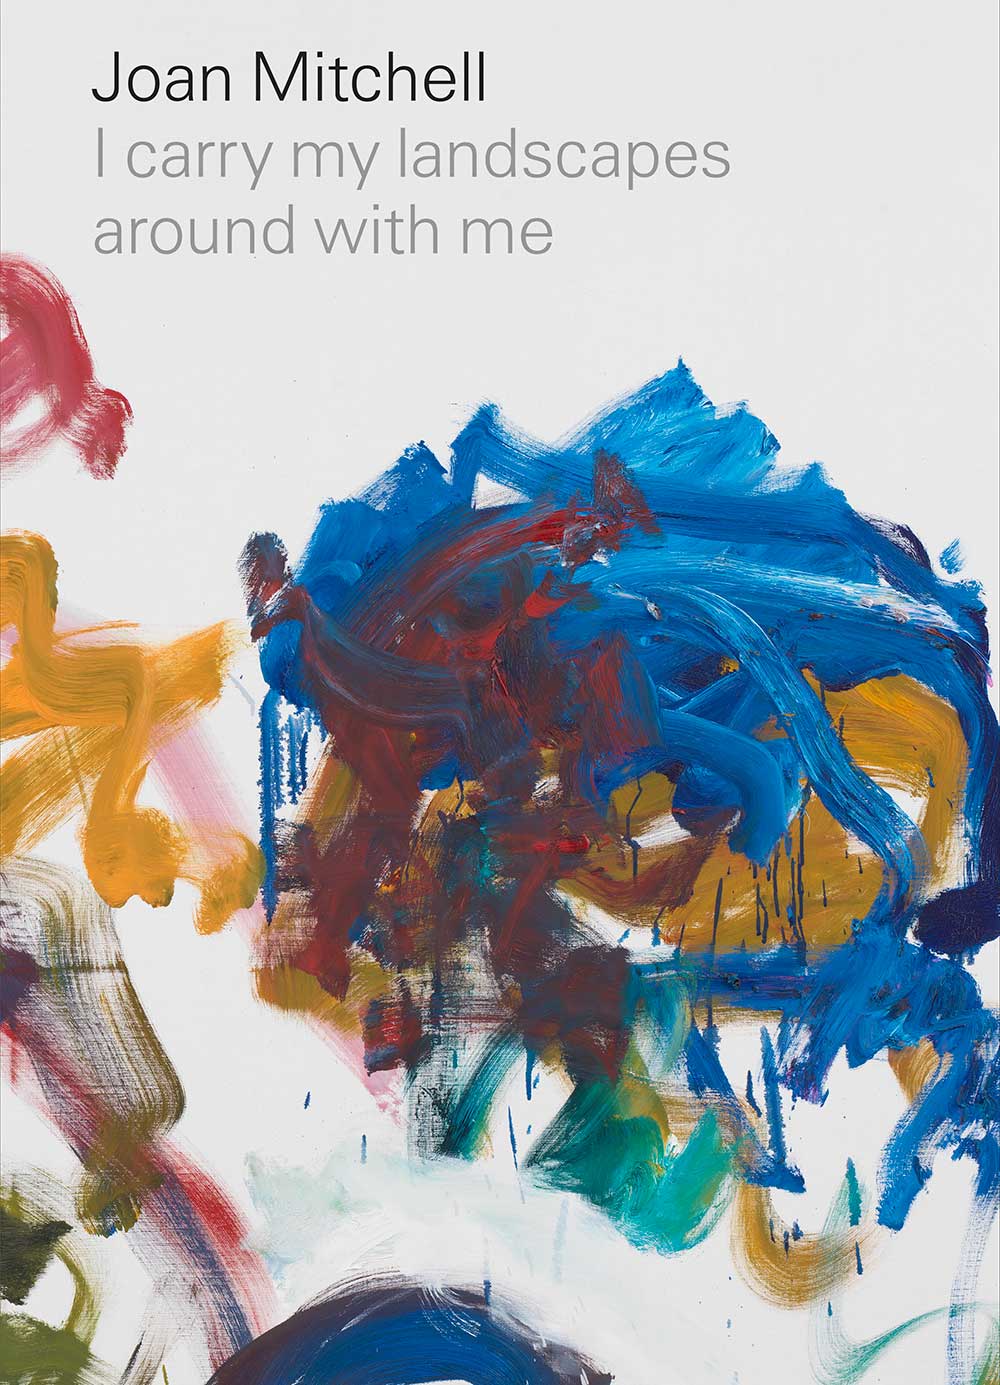 Cover of a book titled Joan Mitchell: I carry my landscapes around with me, published by David Zwirner Books in 2020.